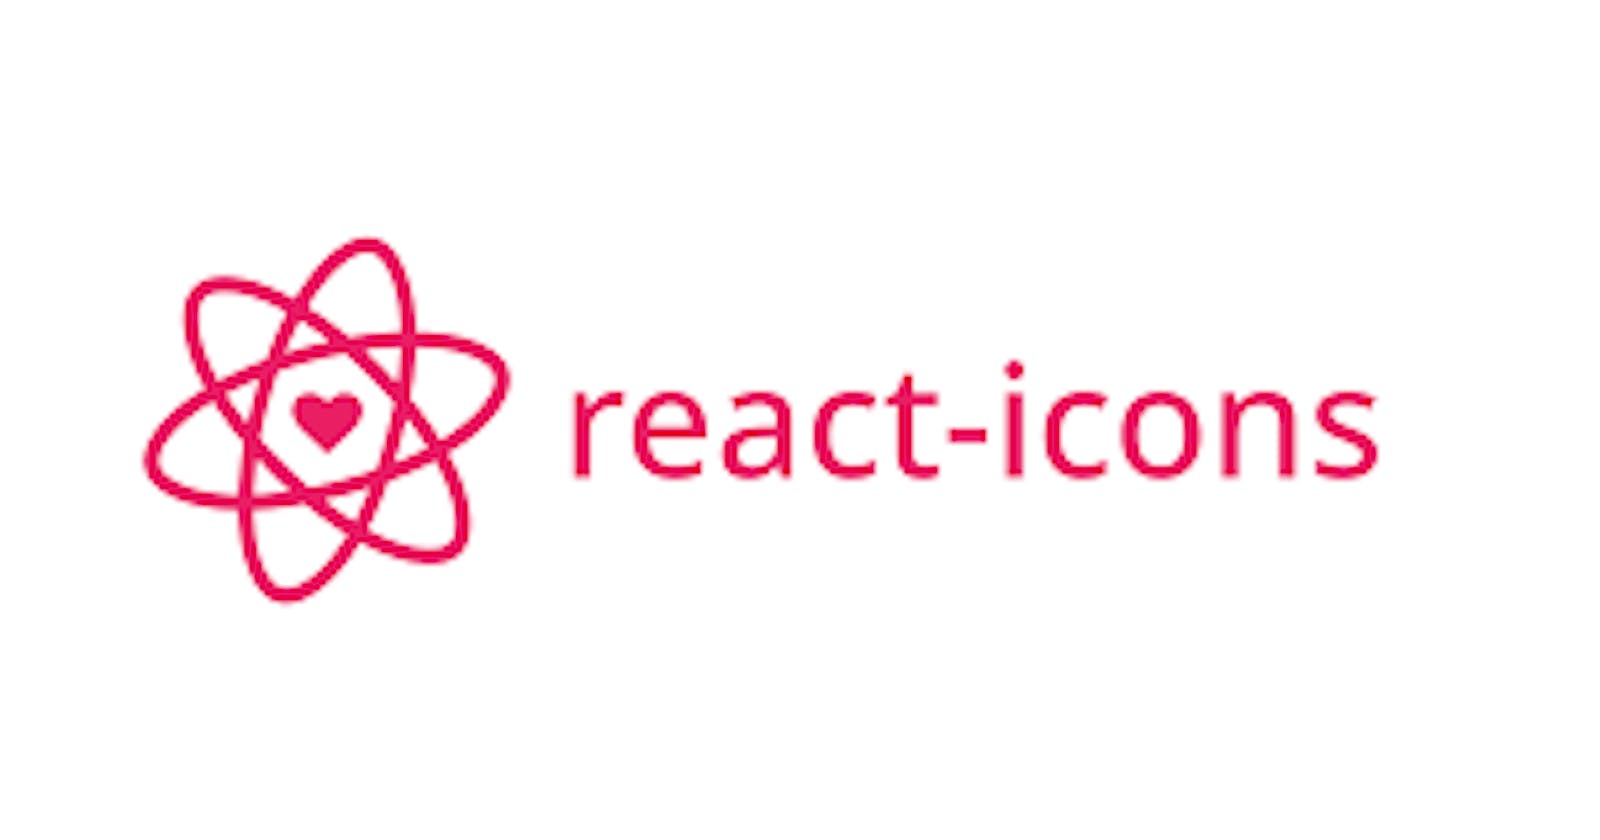 Using Icons in React